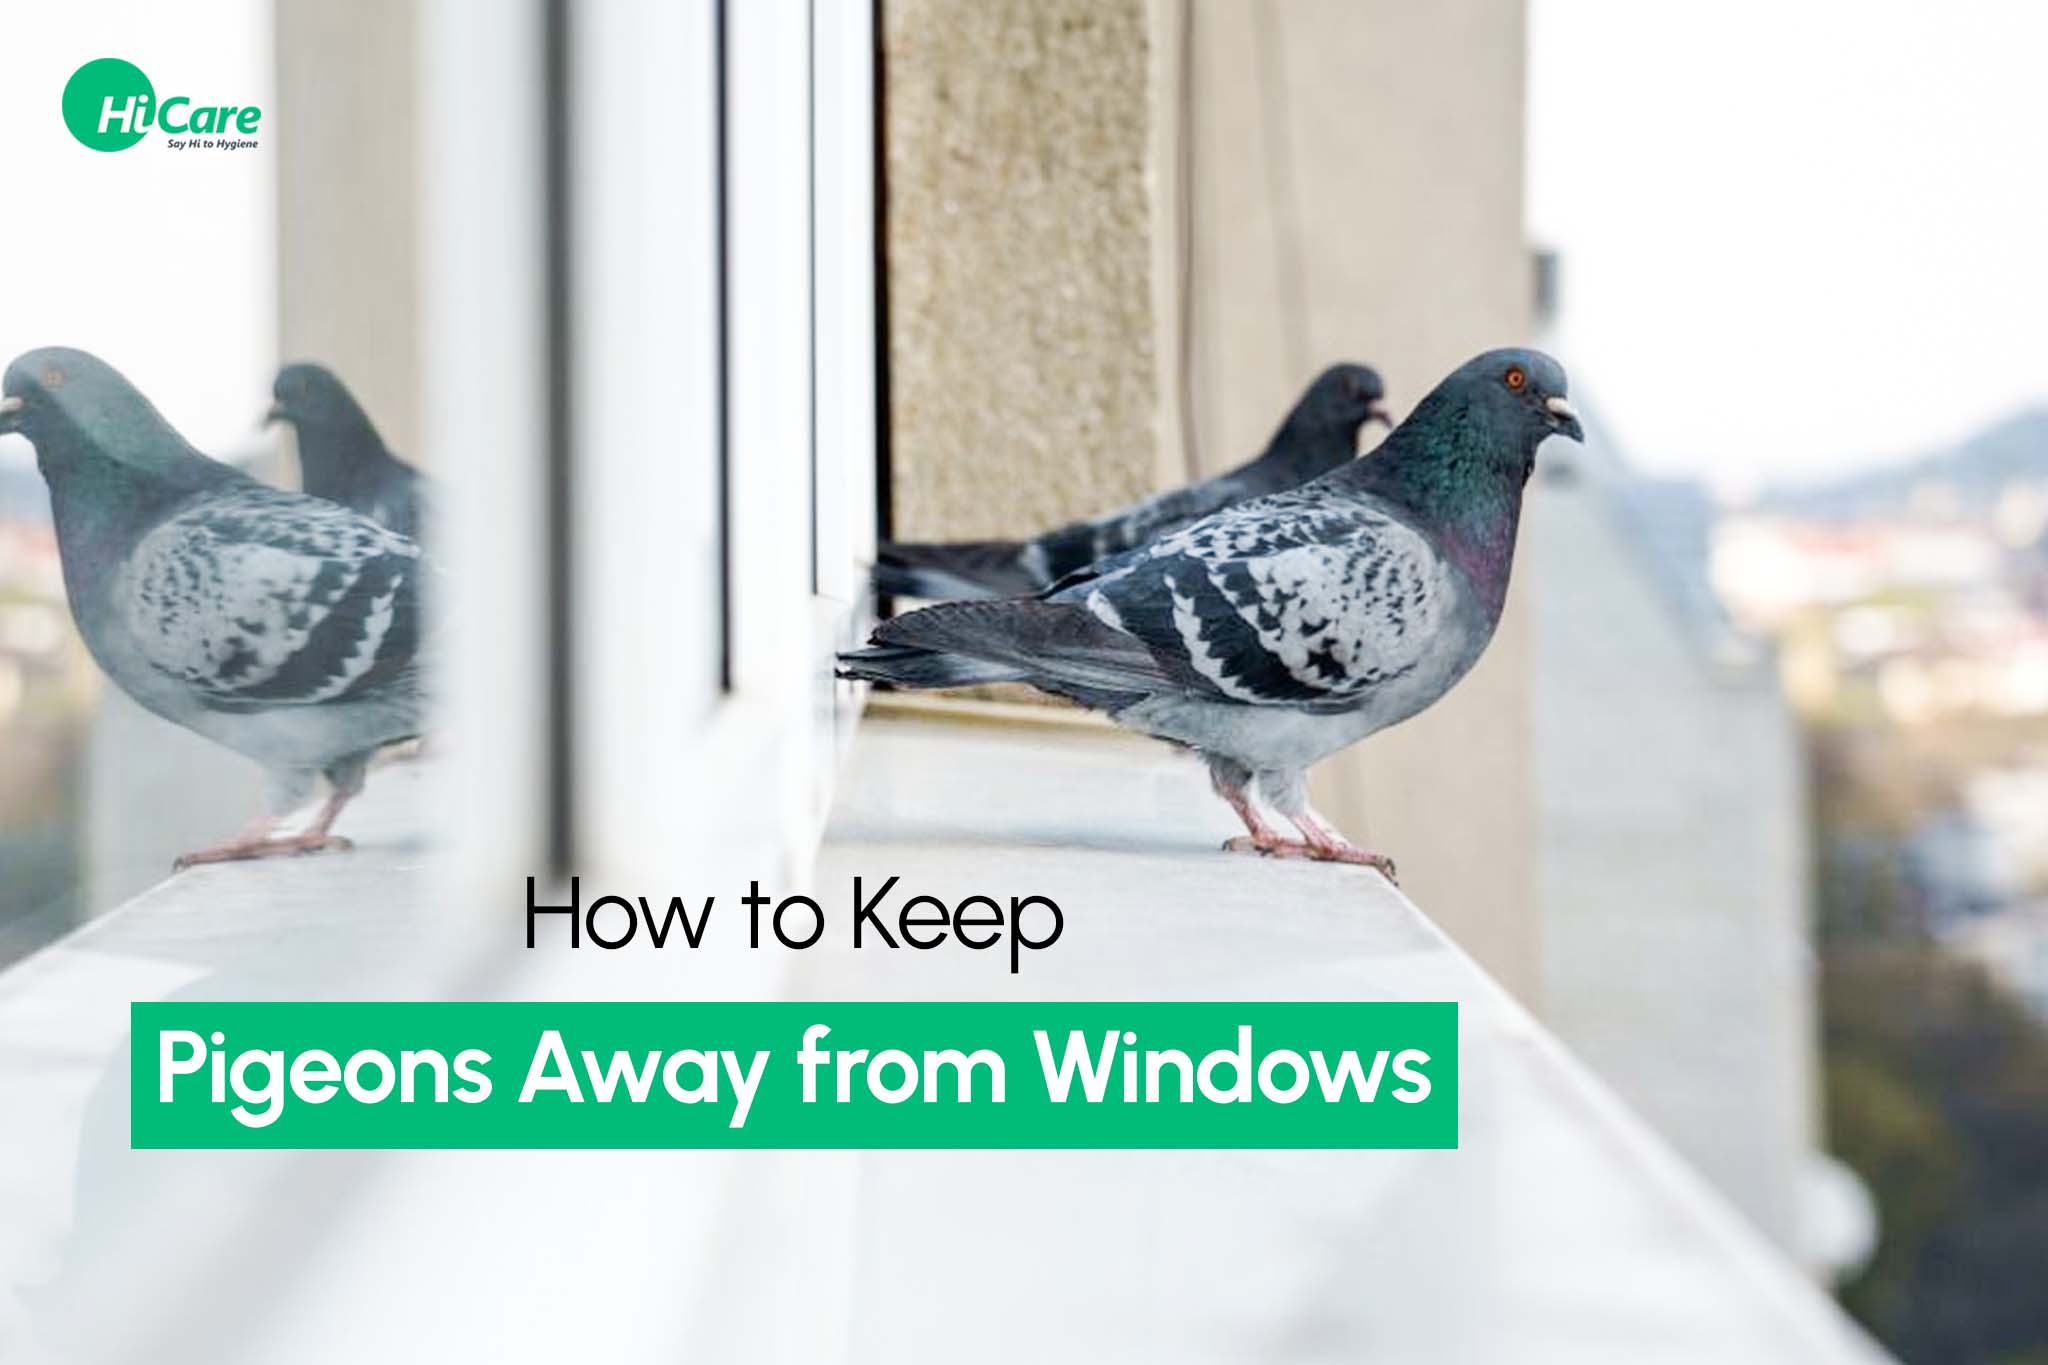 How to Keep Pigeons Away from Windows?